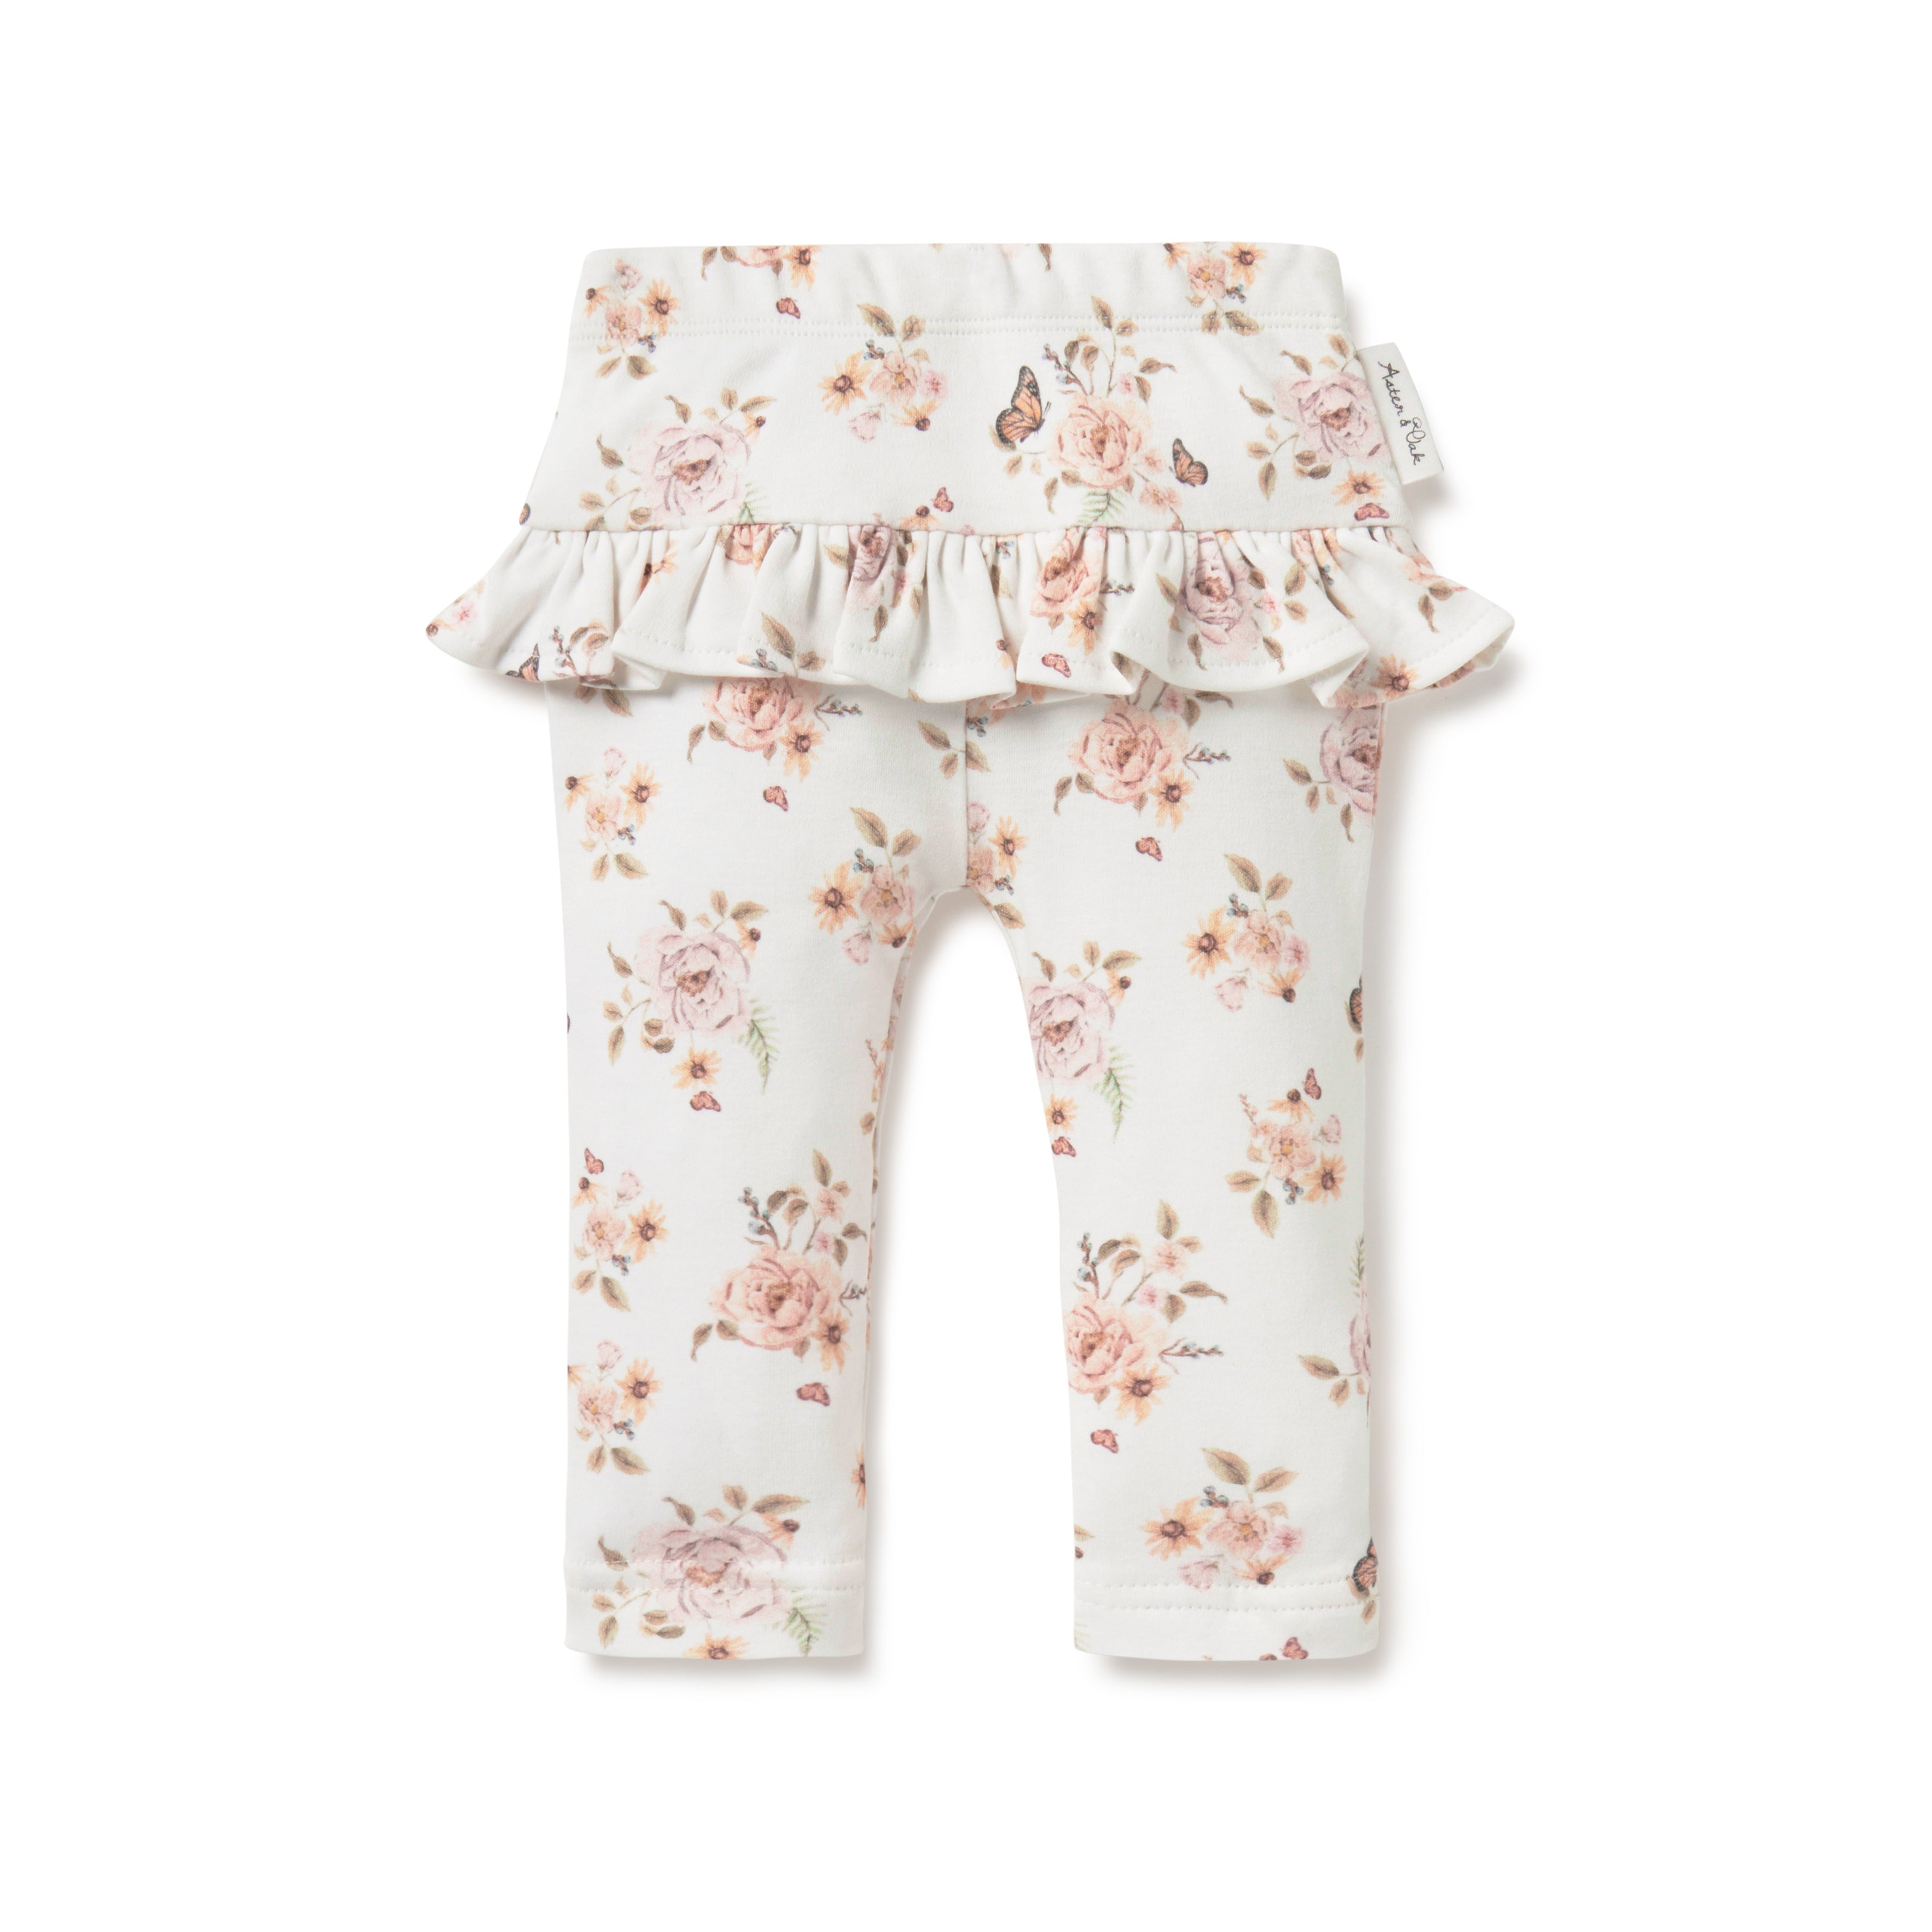 Floral Butterfly Geometric Baby Girls Fleece Lined Leggings 19 Designs For  Girls, Lovely Summer Trousers For Kids H171 From Wholesalebaby, $12.11